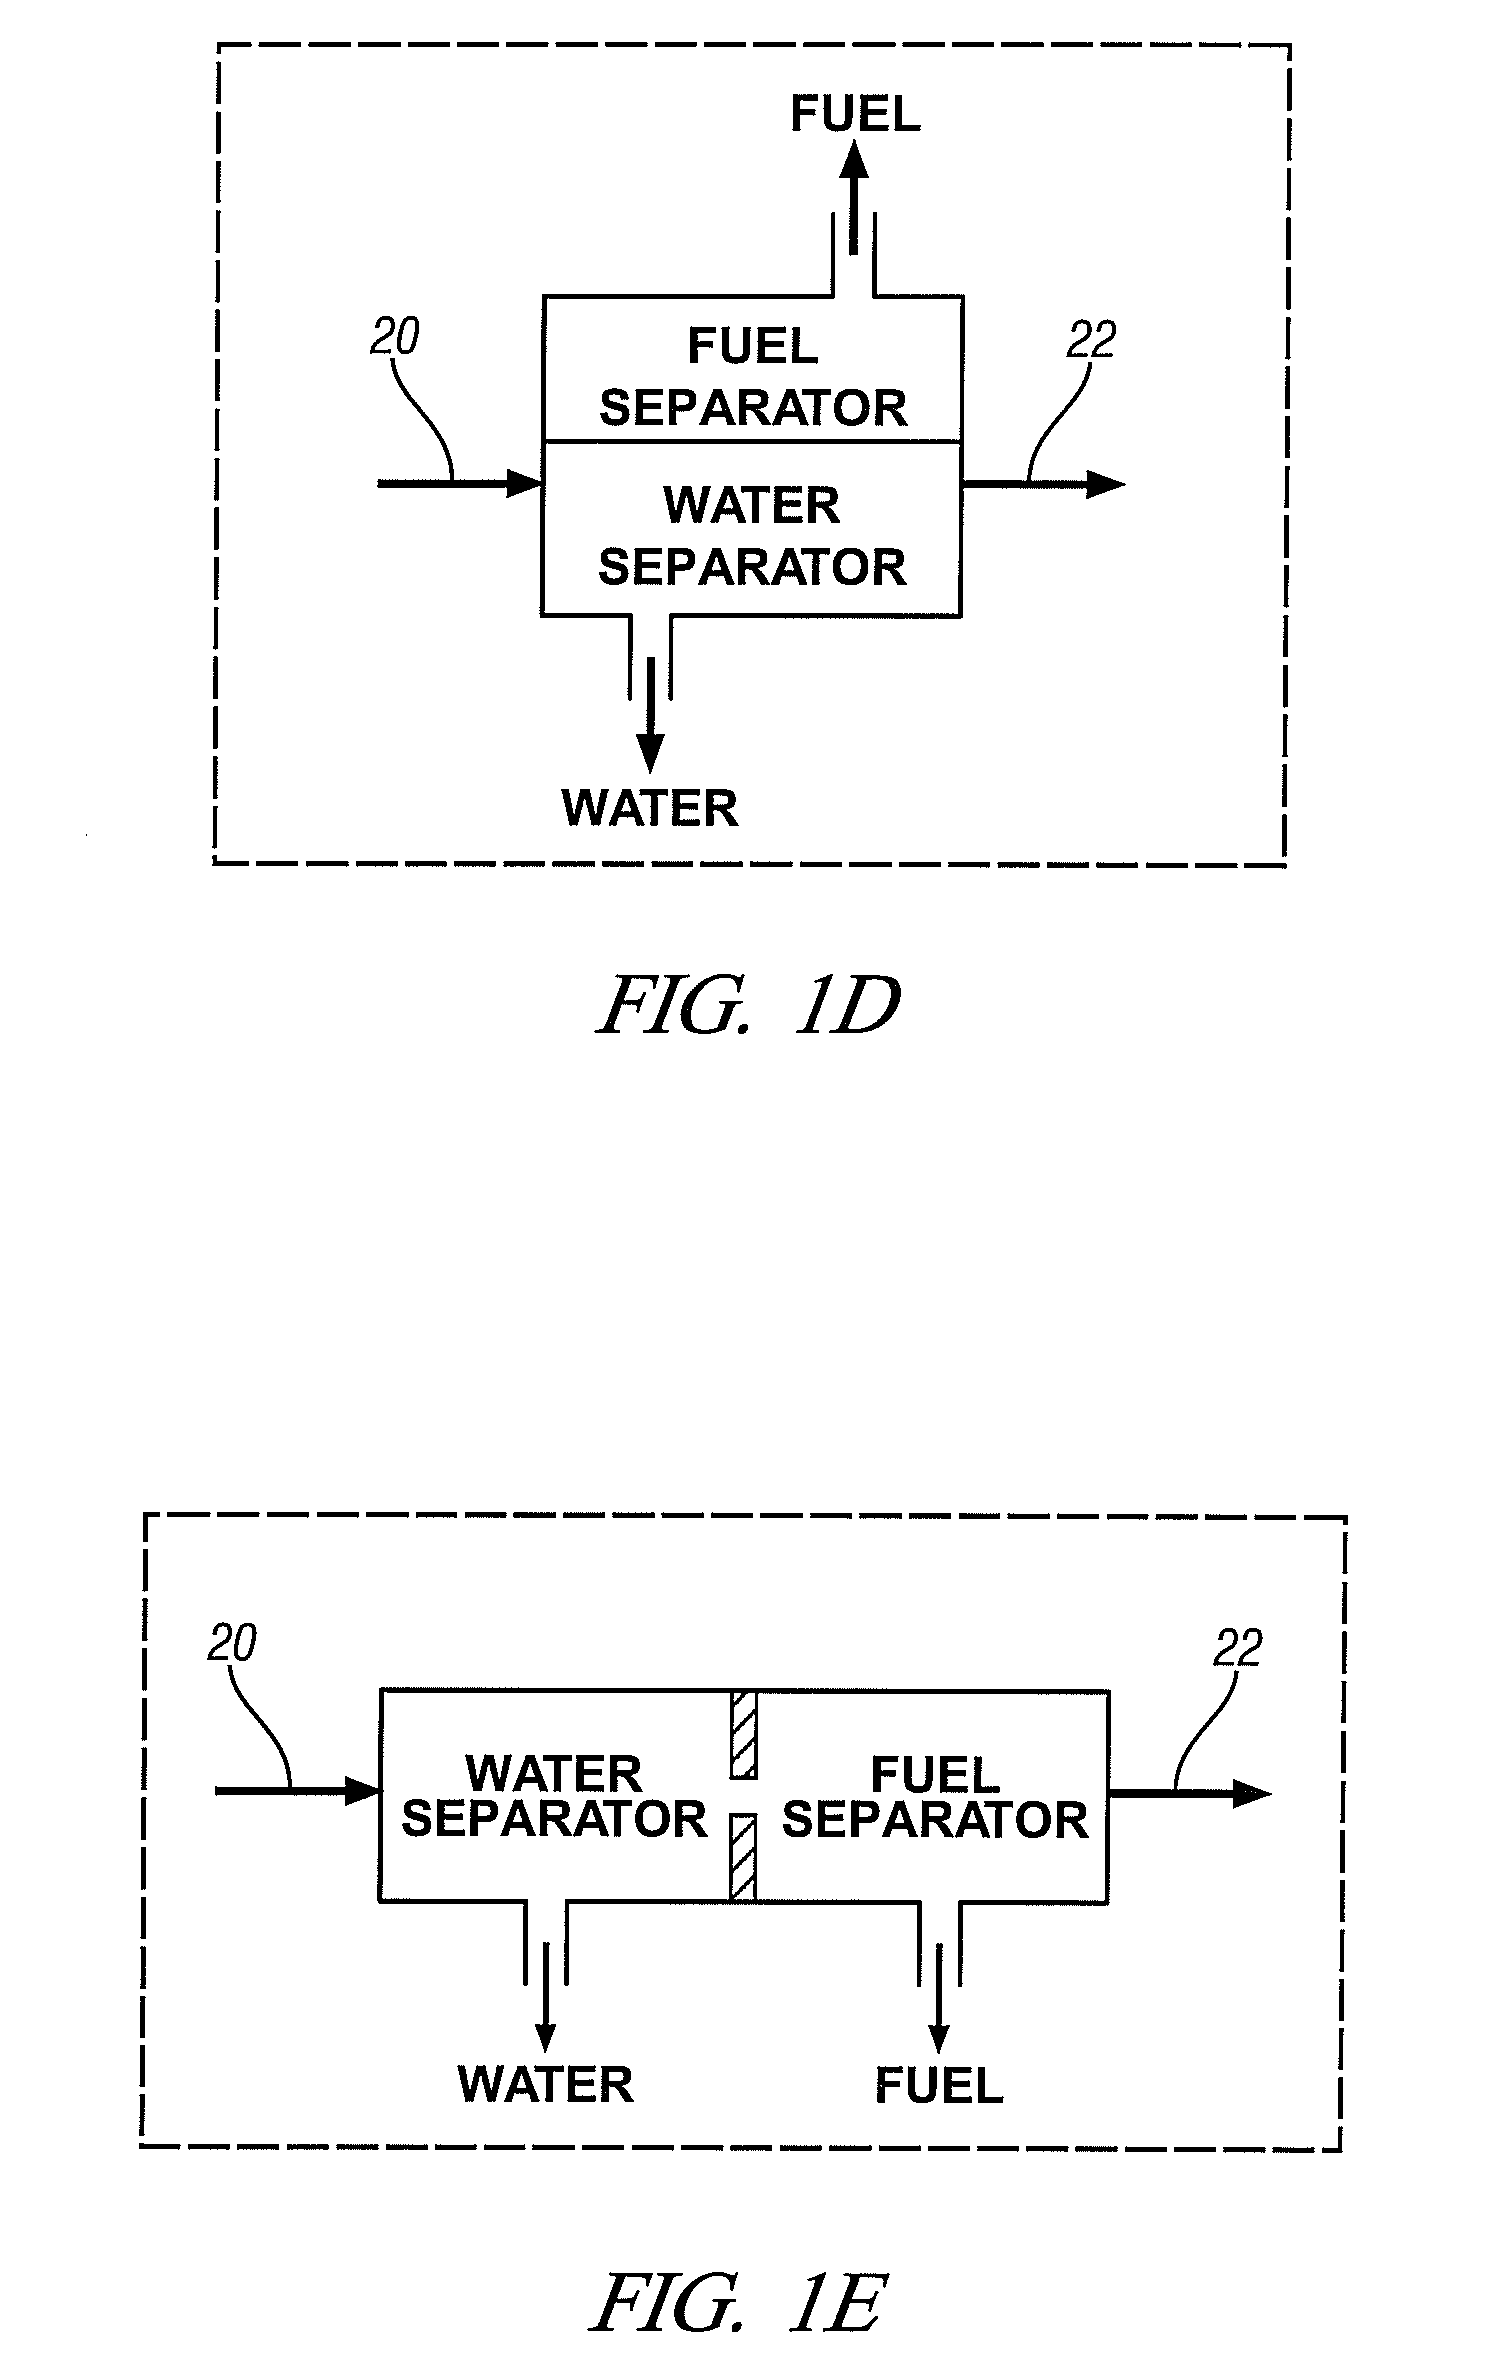 Membrane separation of water and fuel from engine oil in an internal combustion engine